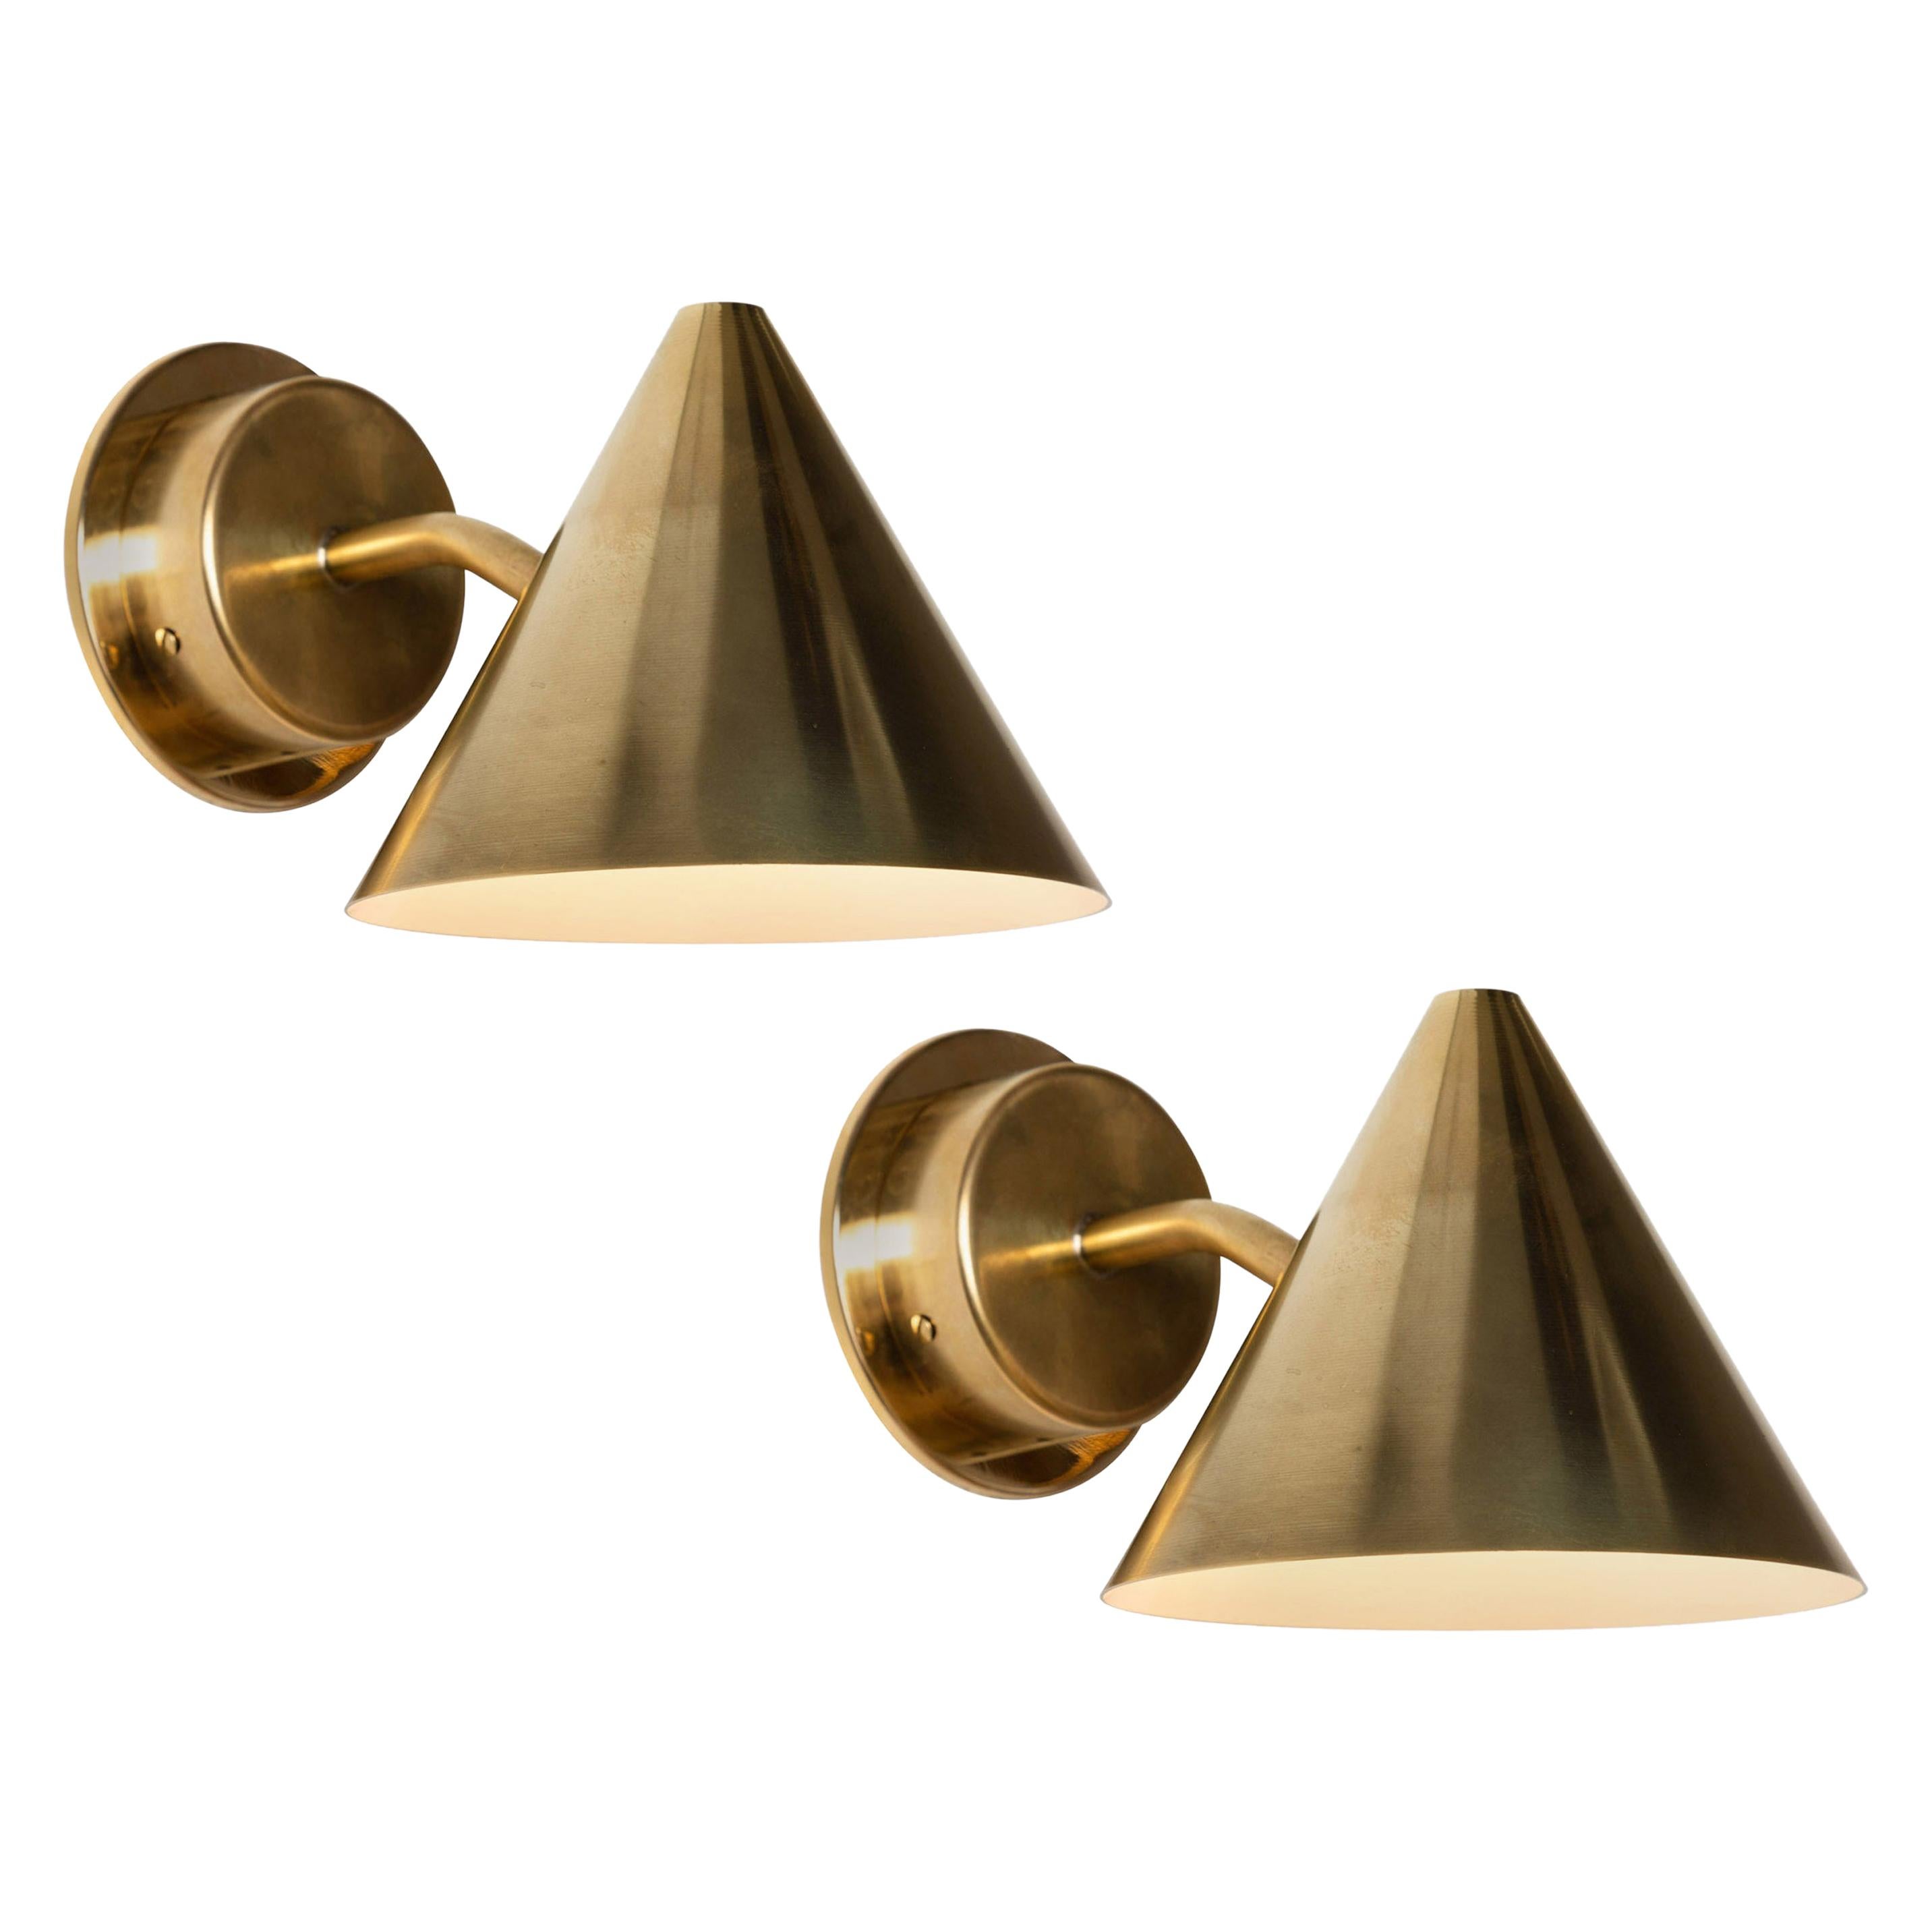 Pair of Hans-Agne Jakobsson 'Mini-Tratten' Polished Brass Outdoor Sconces